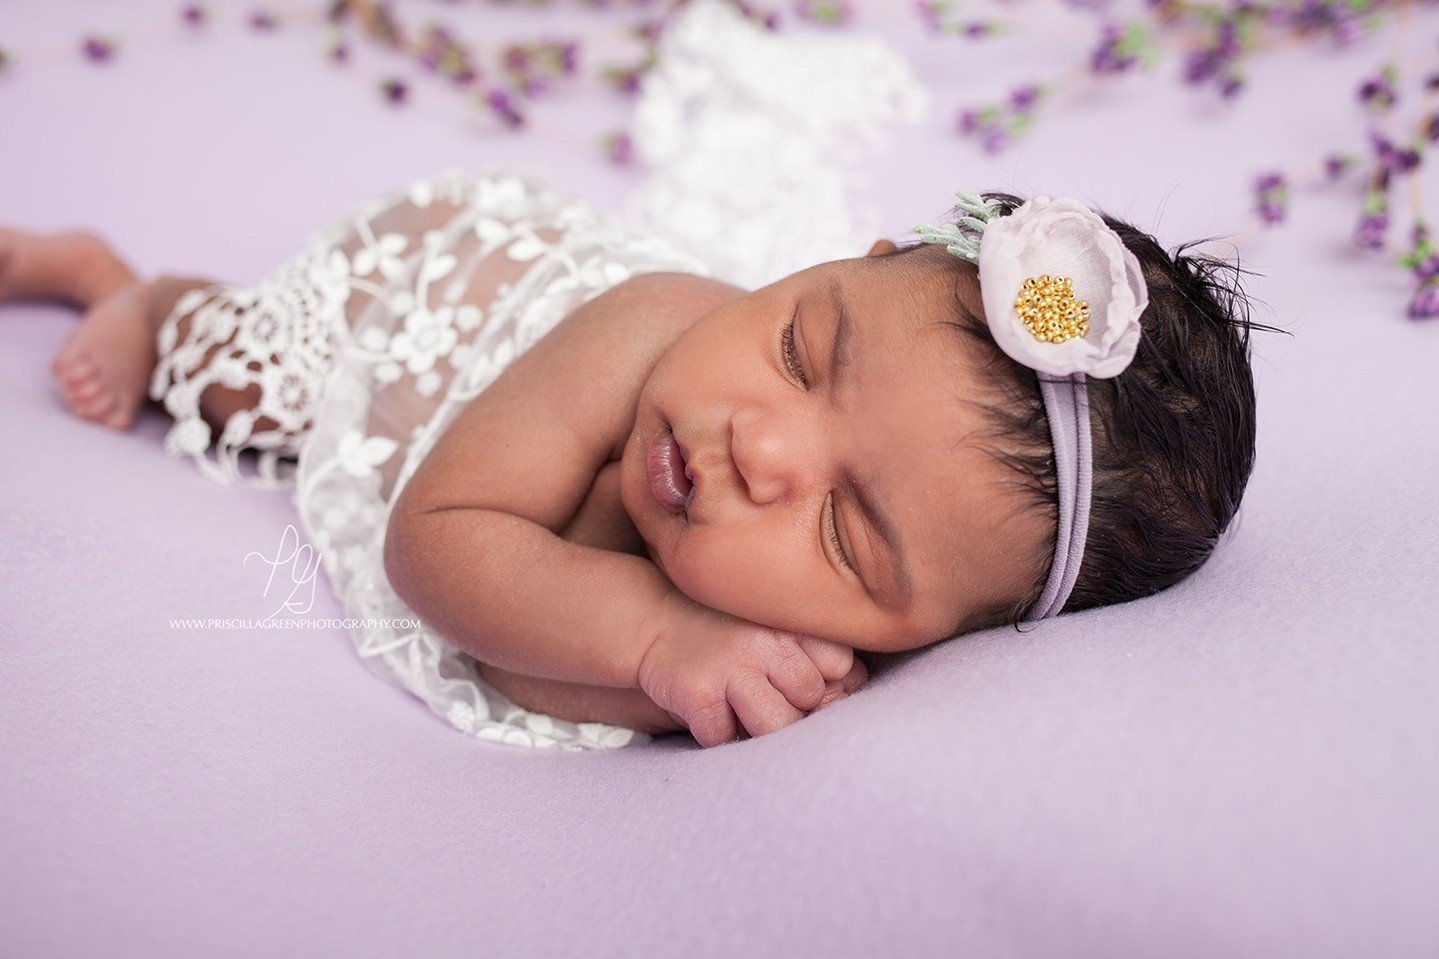 When to take newborn photos?⁠
There's no exact age as all babies are different but the general rule of thumb if looking to achieve those sweet snuggly, sleepy newborn poses, is to have your newborn session within the first two weeks of life. We alway